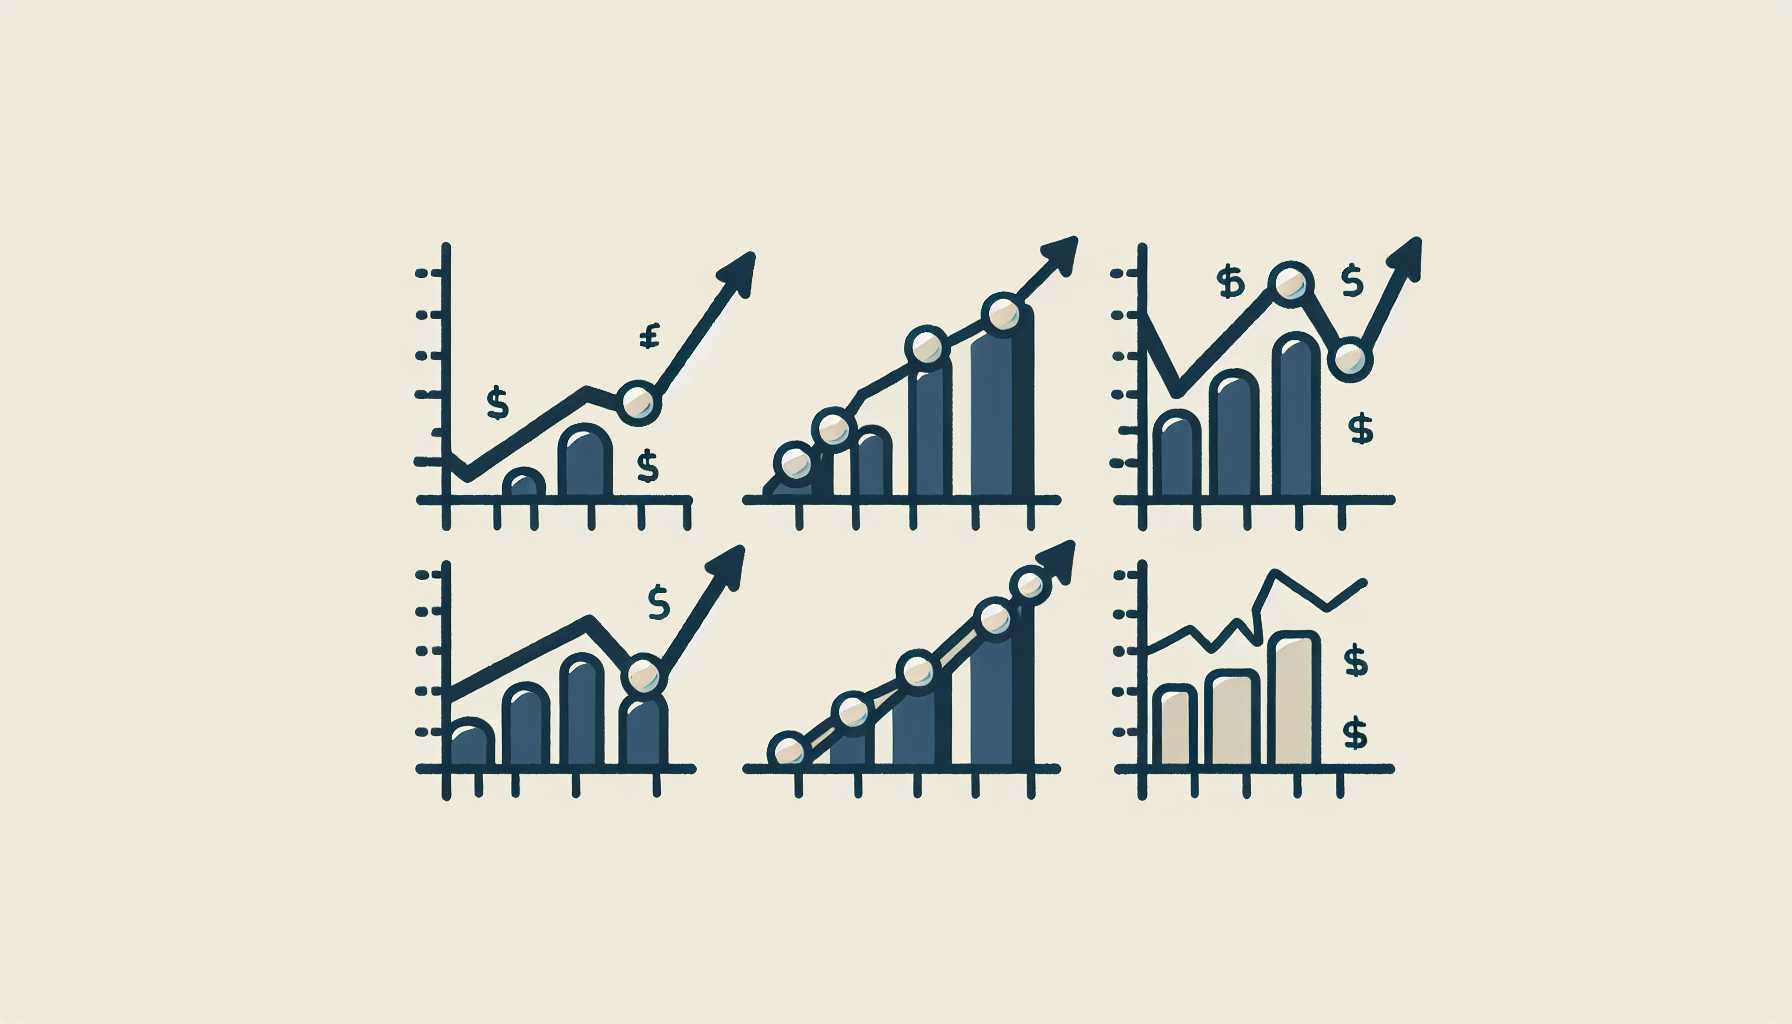 clipart of economic graphs showing inflation and stagflation trends